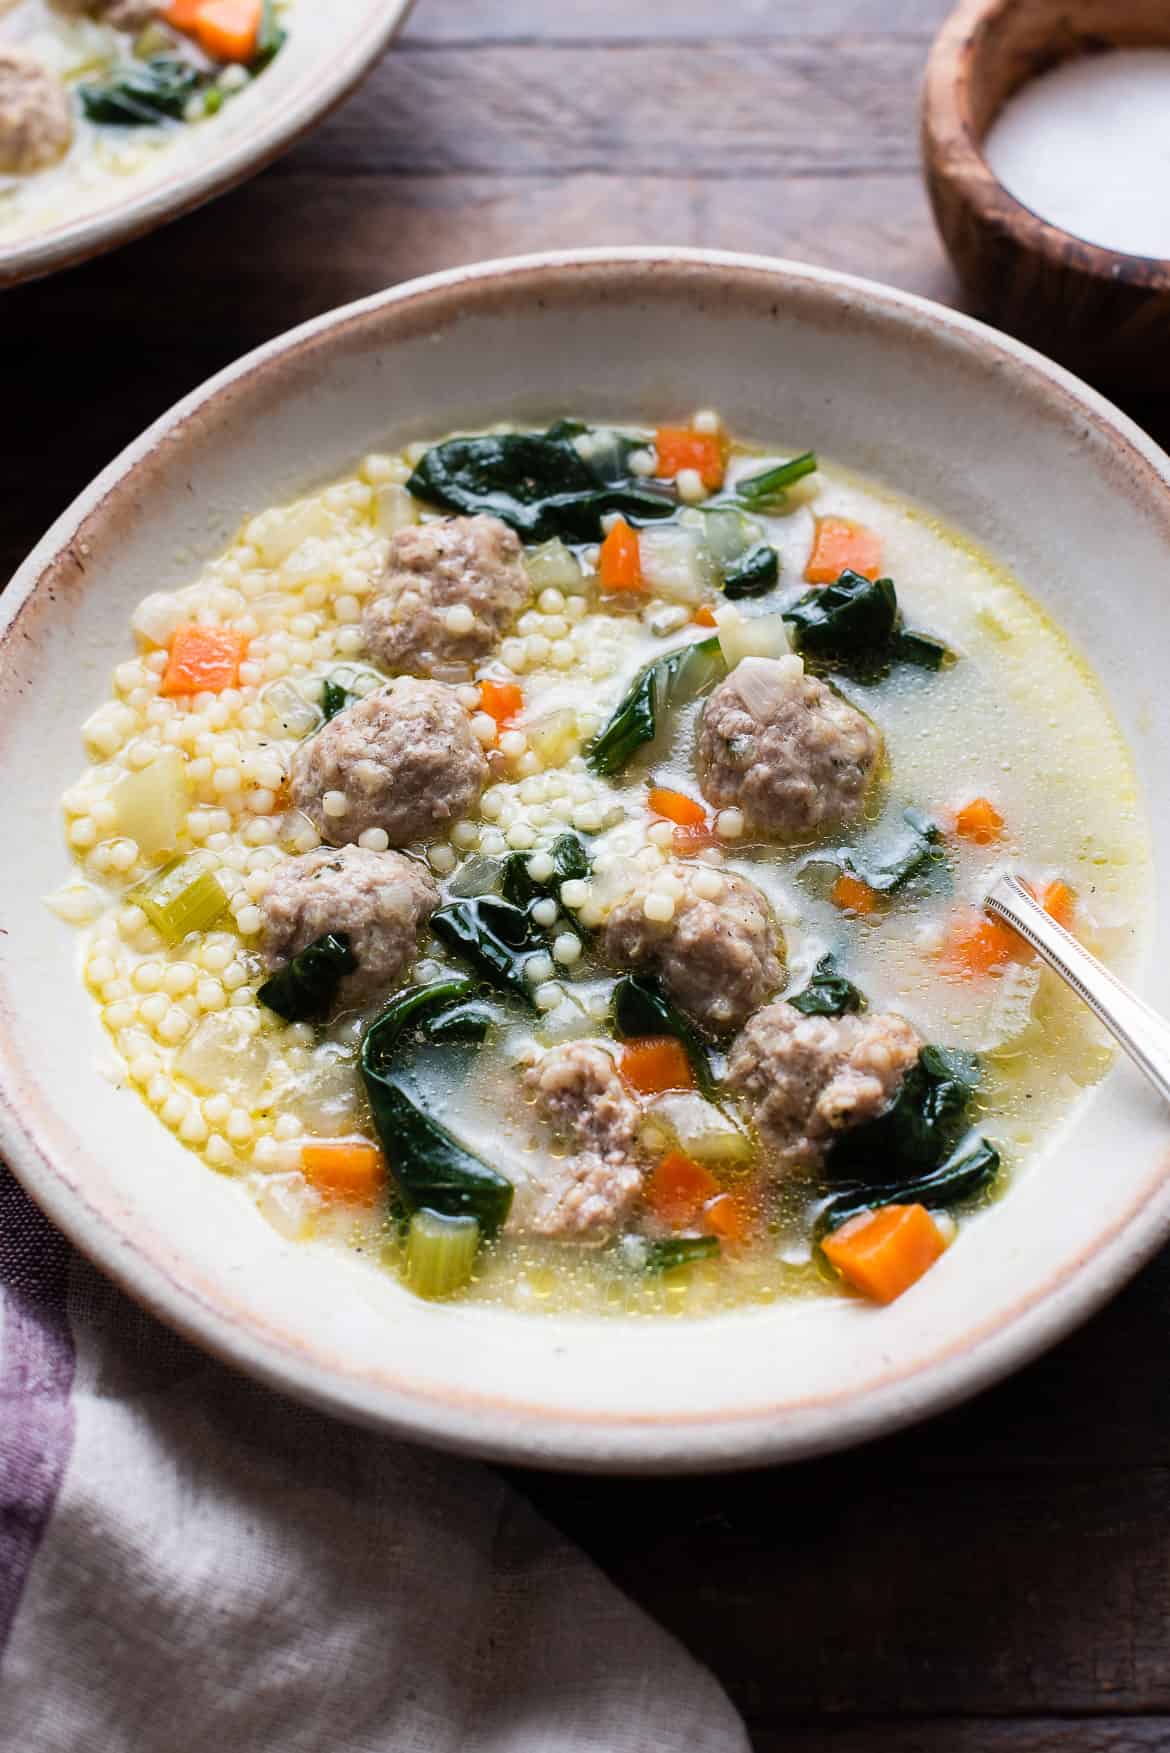 A bowl of homemade Italian Wedding Soup with meatballs, carrots, celery, and spinach.